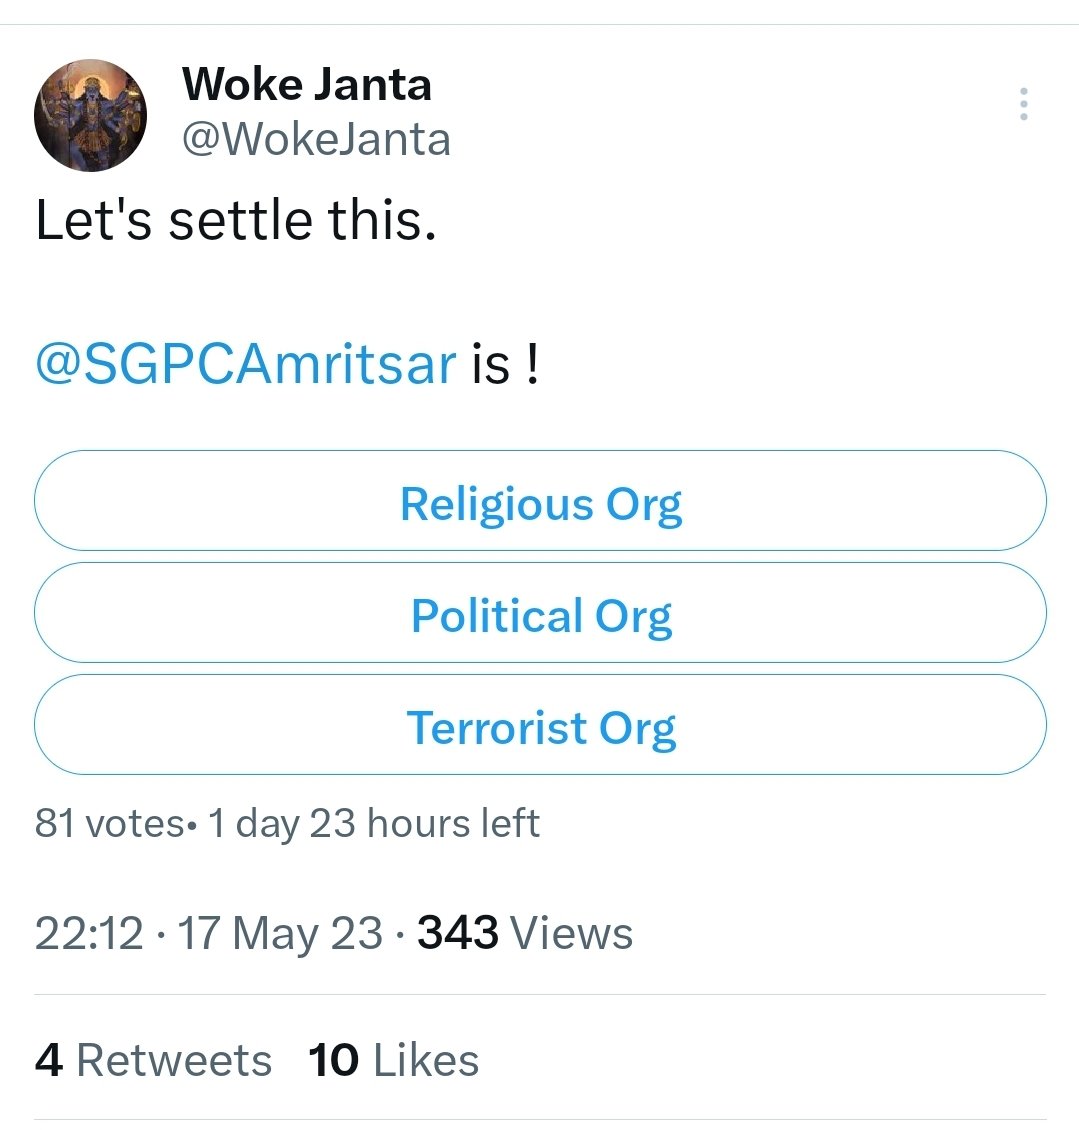 .@PunjabPoliceInd take action against this false propaganda @Twitter handle @wokejanta, bent on defaming constitutional & democratic Sikh body, SGPC . He calls highly objectionable open poll. Who is running it? Will you act & expose it?
@HMOIndia @AmitShah
@CMOPb @BhagwantMann…